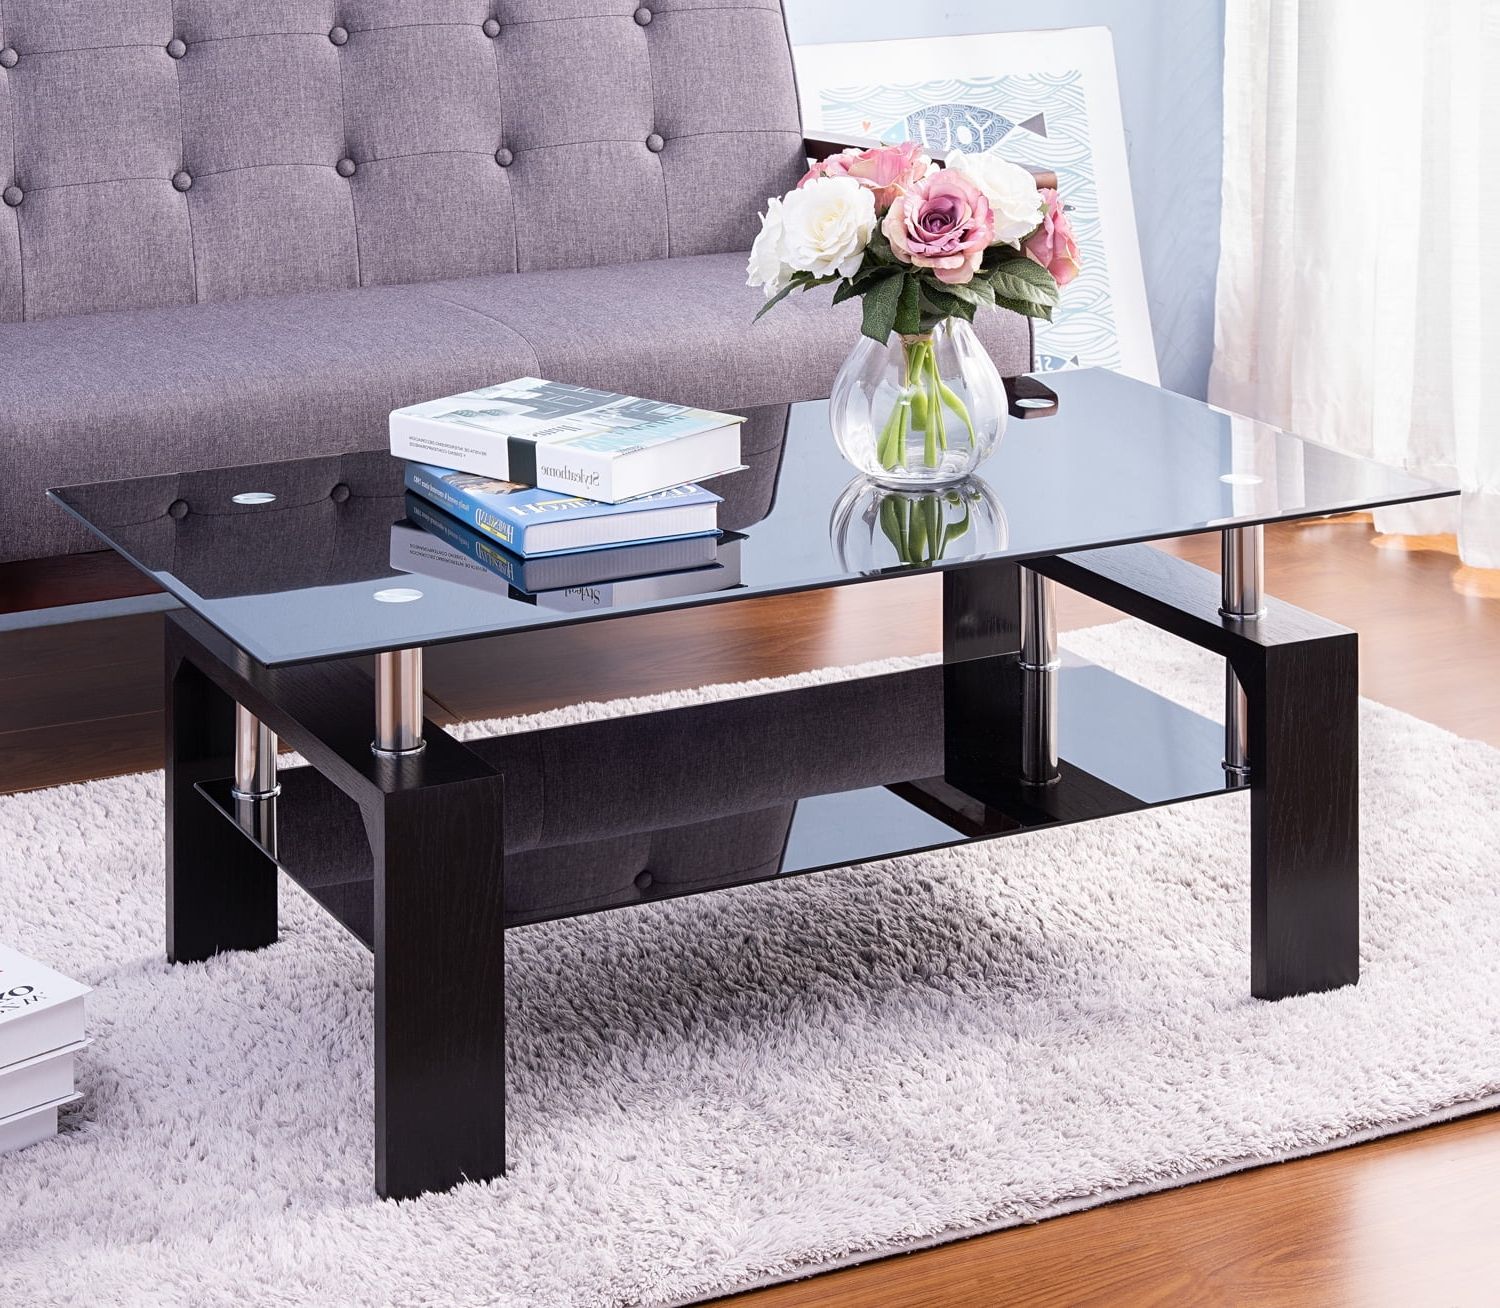 Clear Rectangle Center Coffee Tables Regarding Latest Buy Rectangle Glass Coffee Table, Modern Side Center Table With Shelf (View 14 of 15)